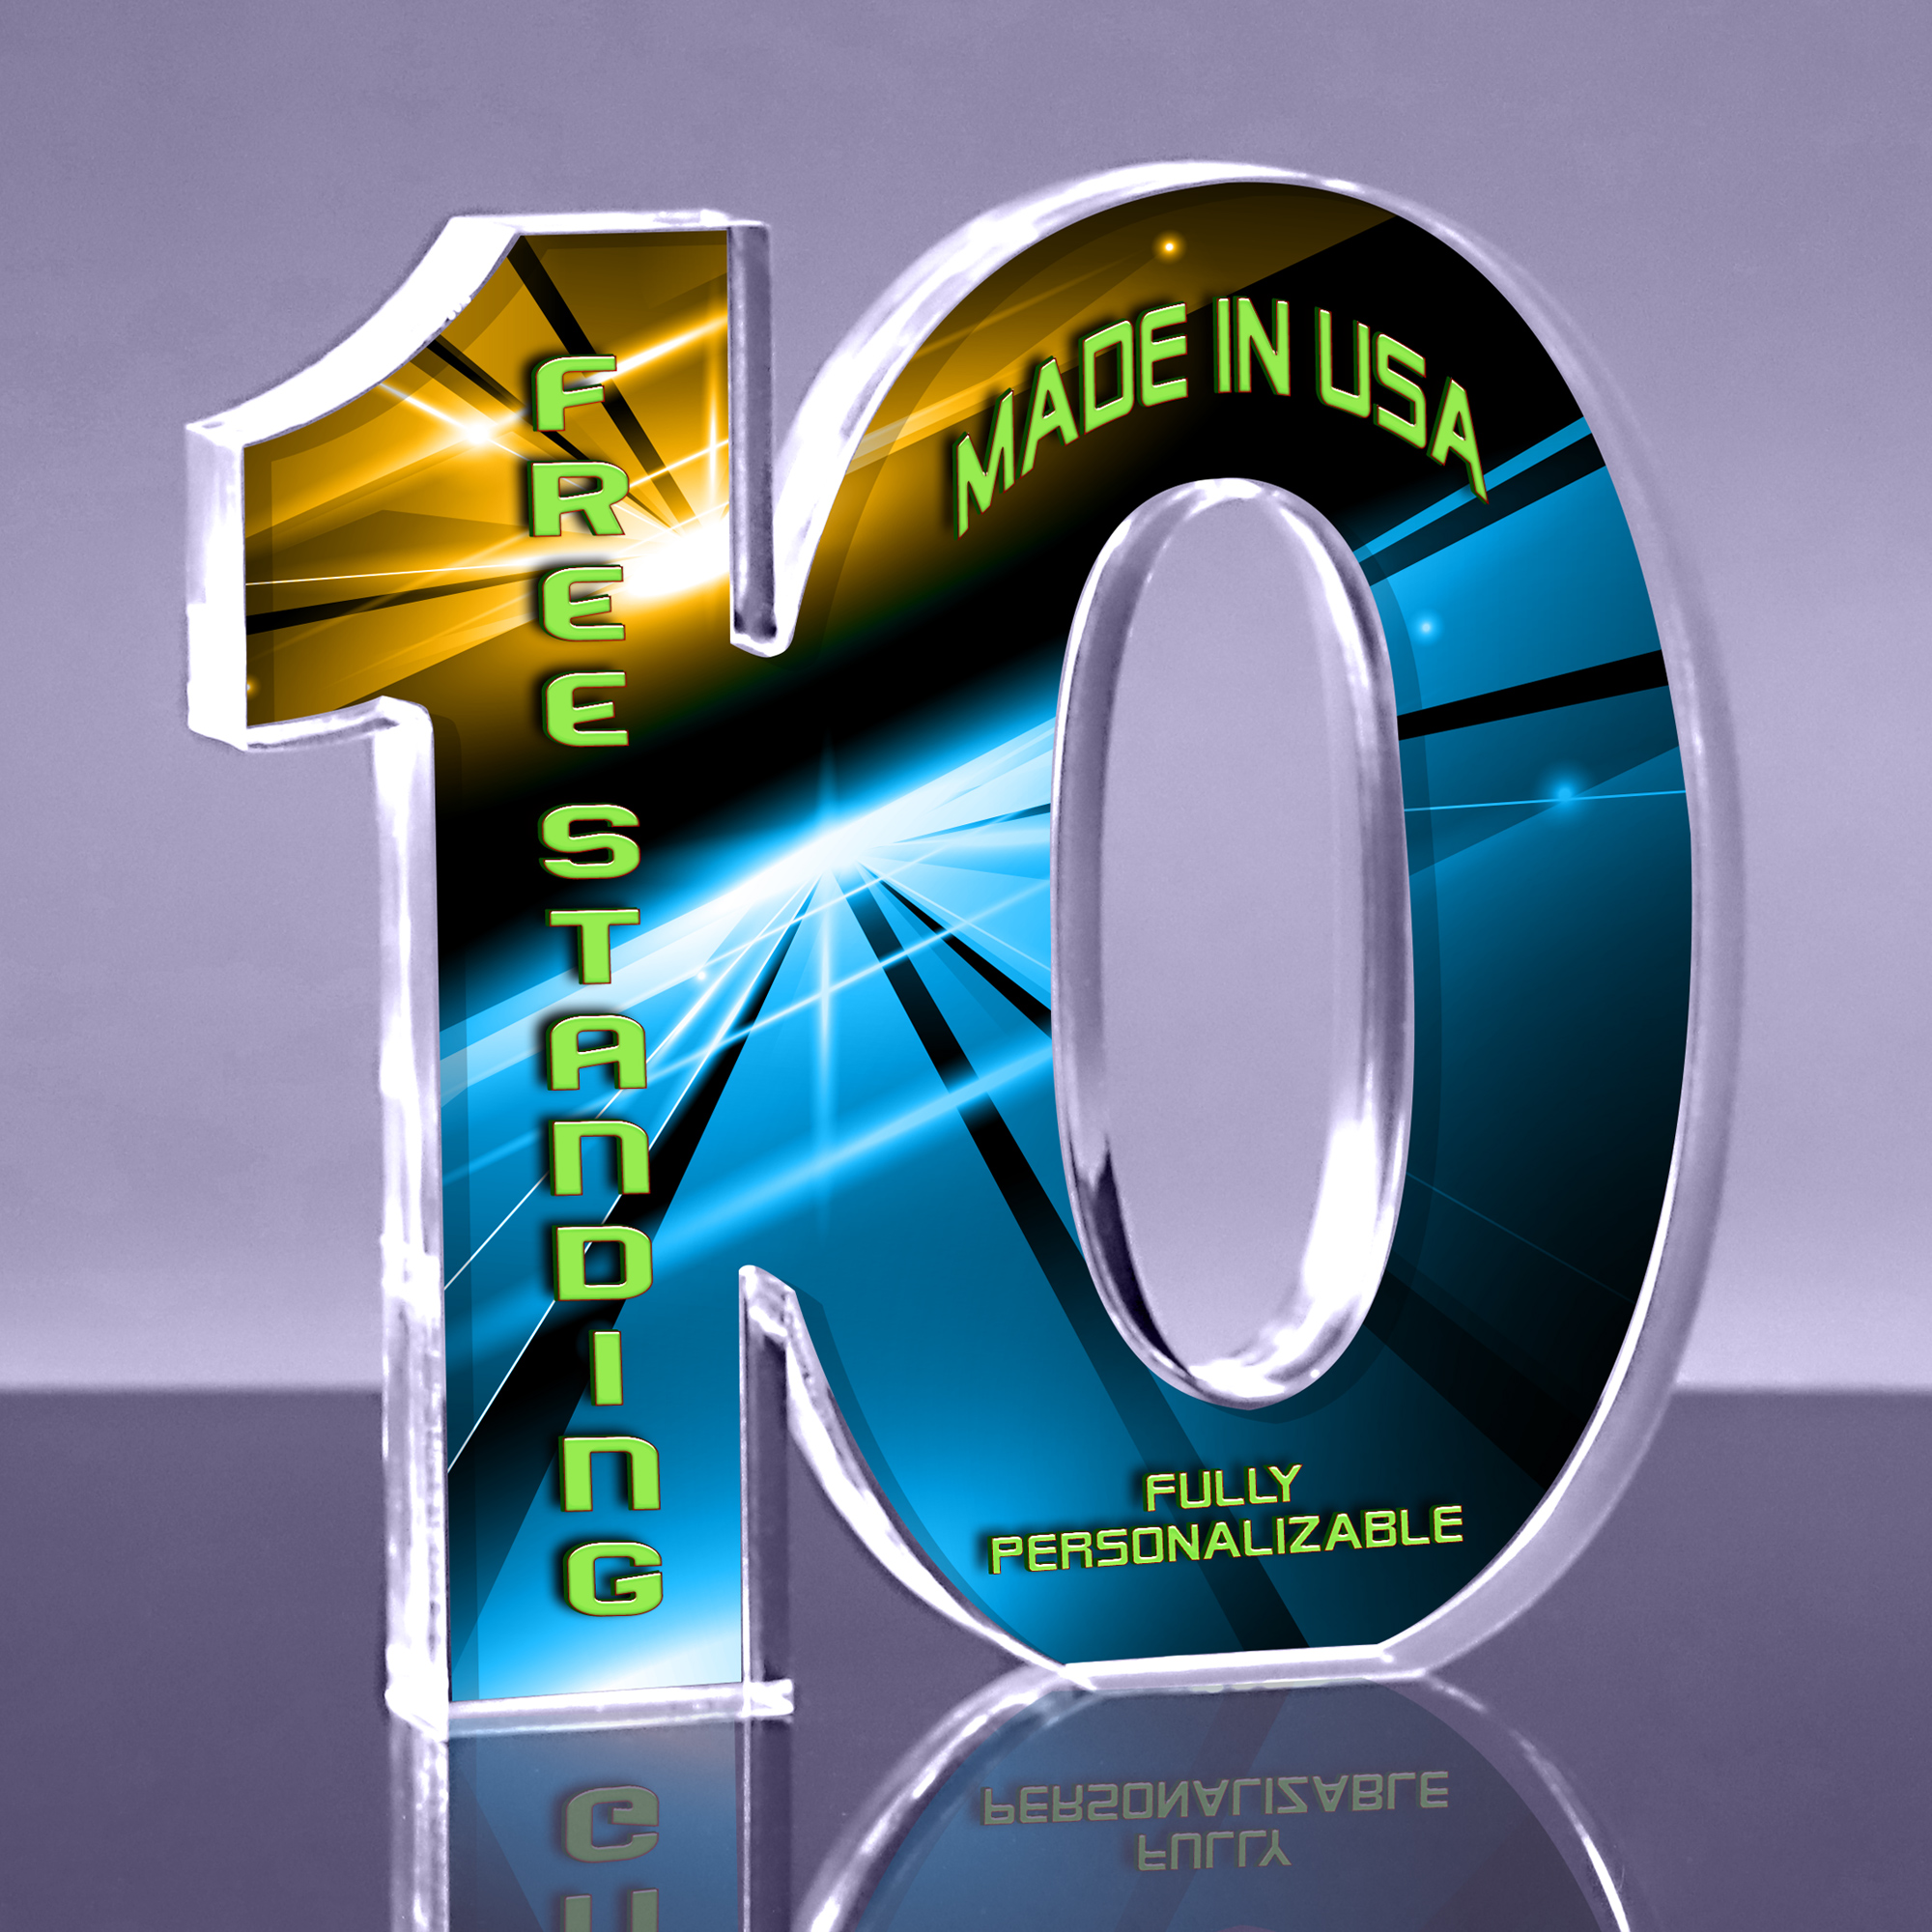 10 Color Acrylic Award - 6.5 x 6.5 x 1 inch Thick